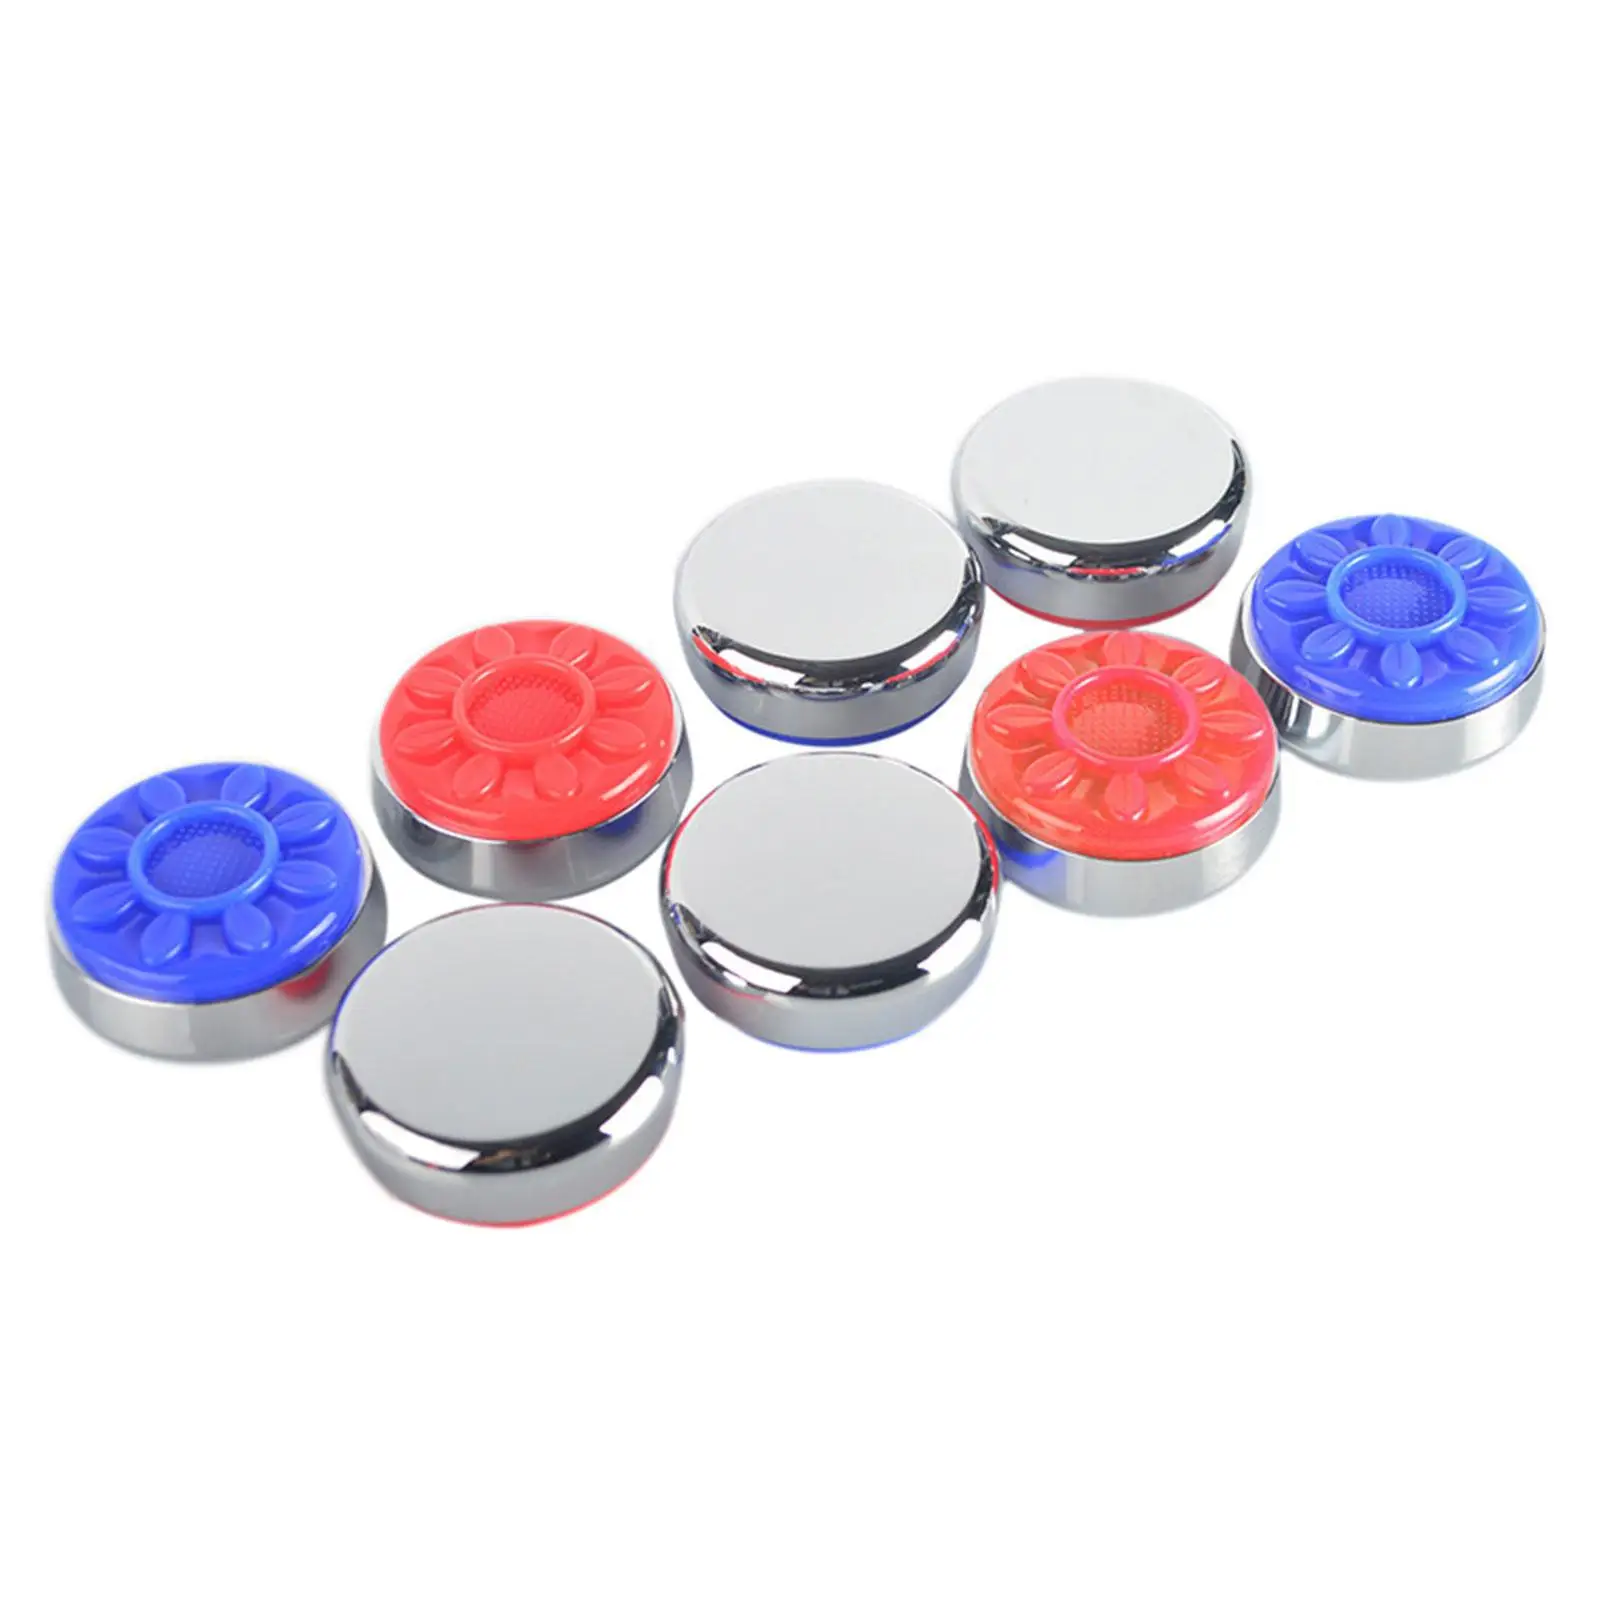 

8x Large Shuffleboard Pucks Tabletop Game Pucks Replacements Family Games Multiple Color 58mm Shuffleboard Table Equipment